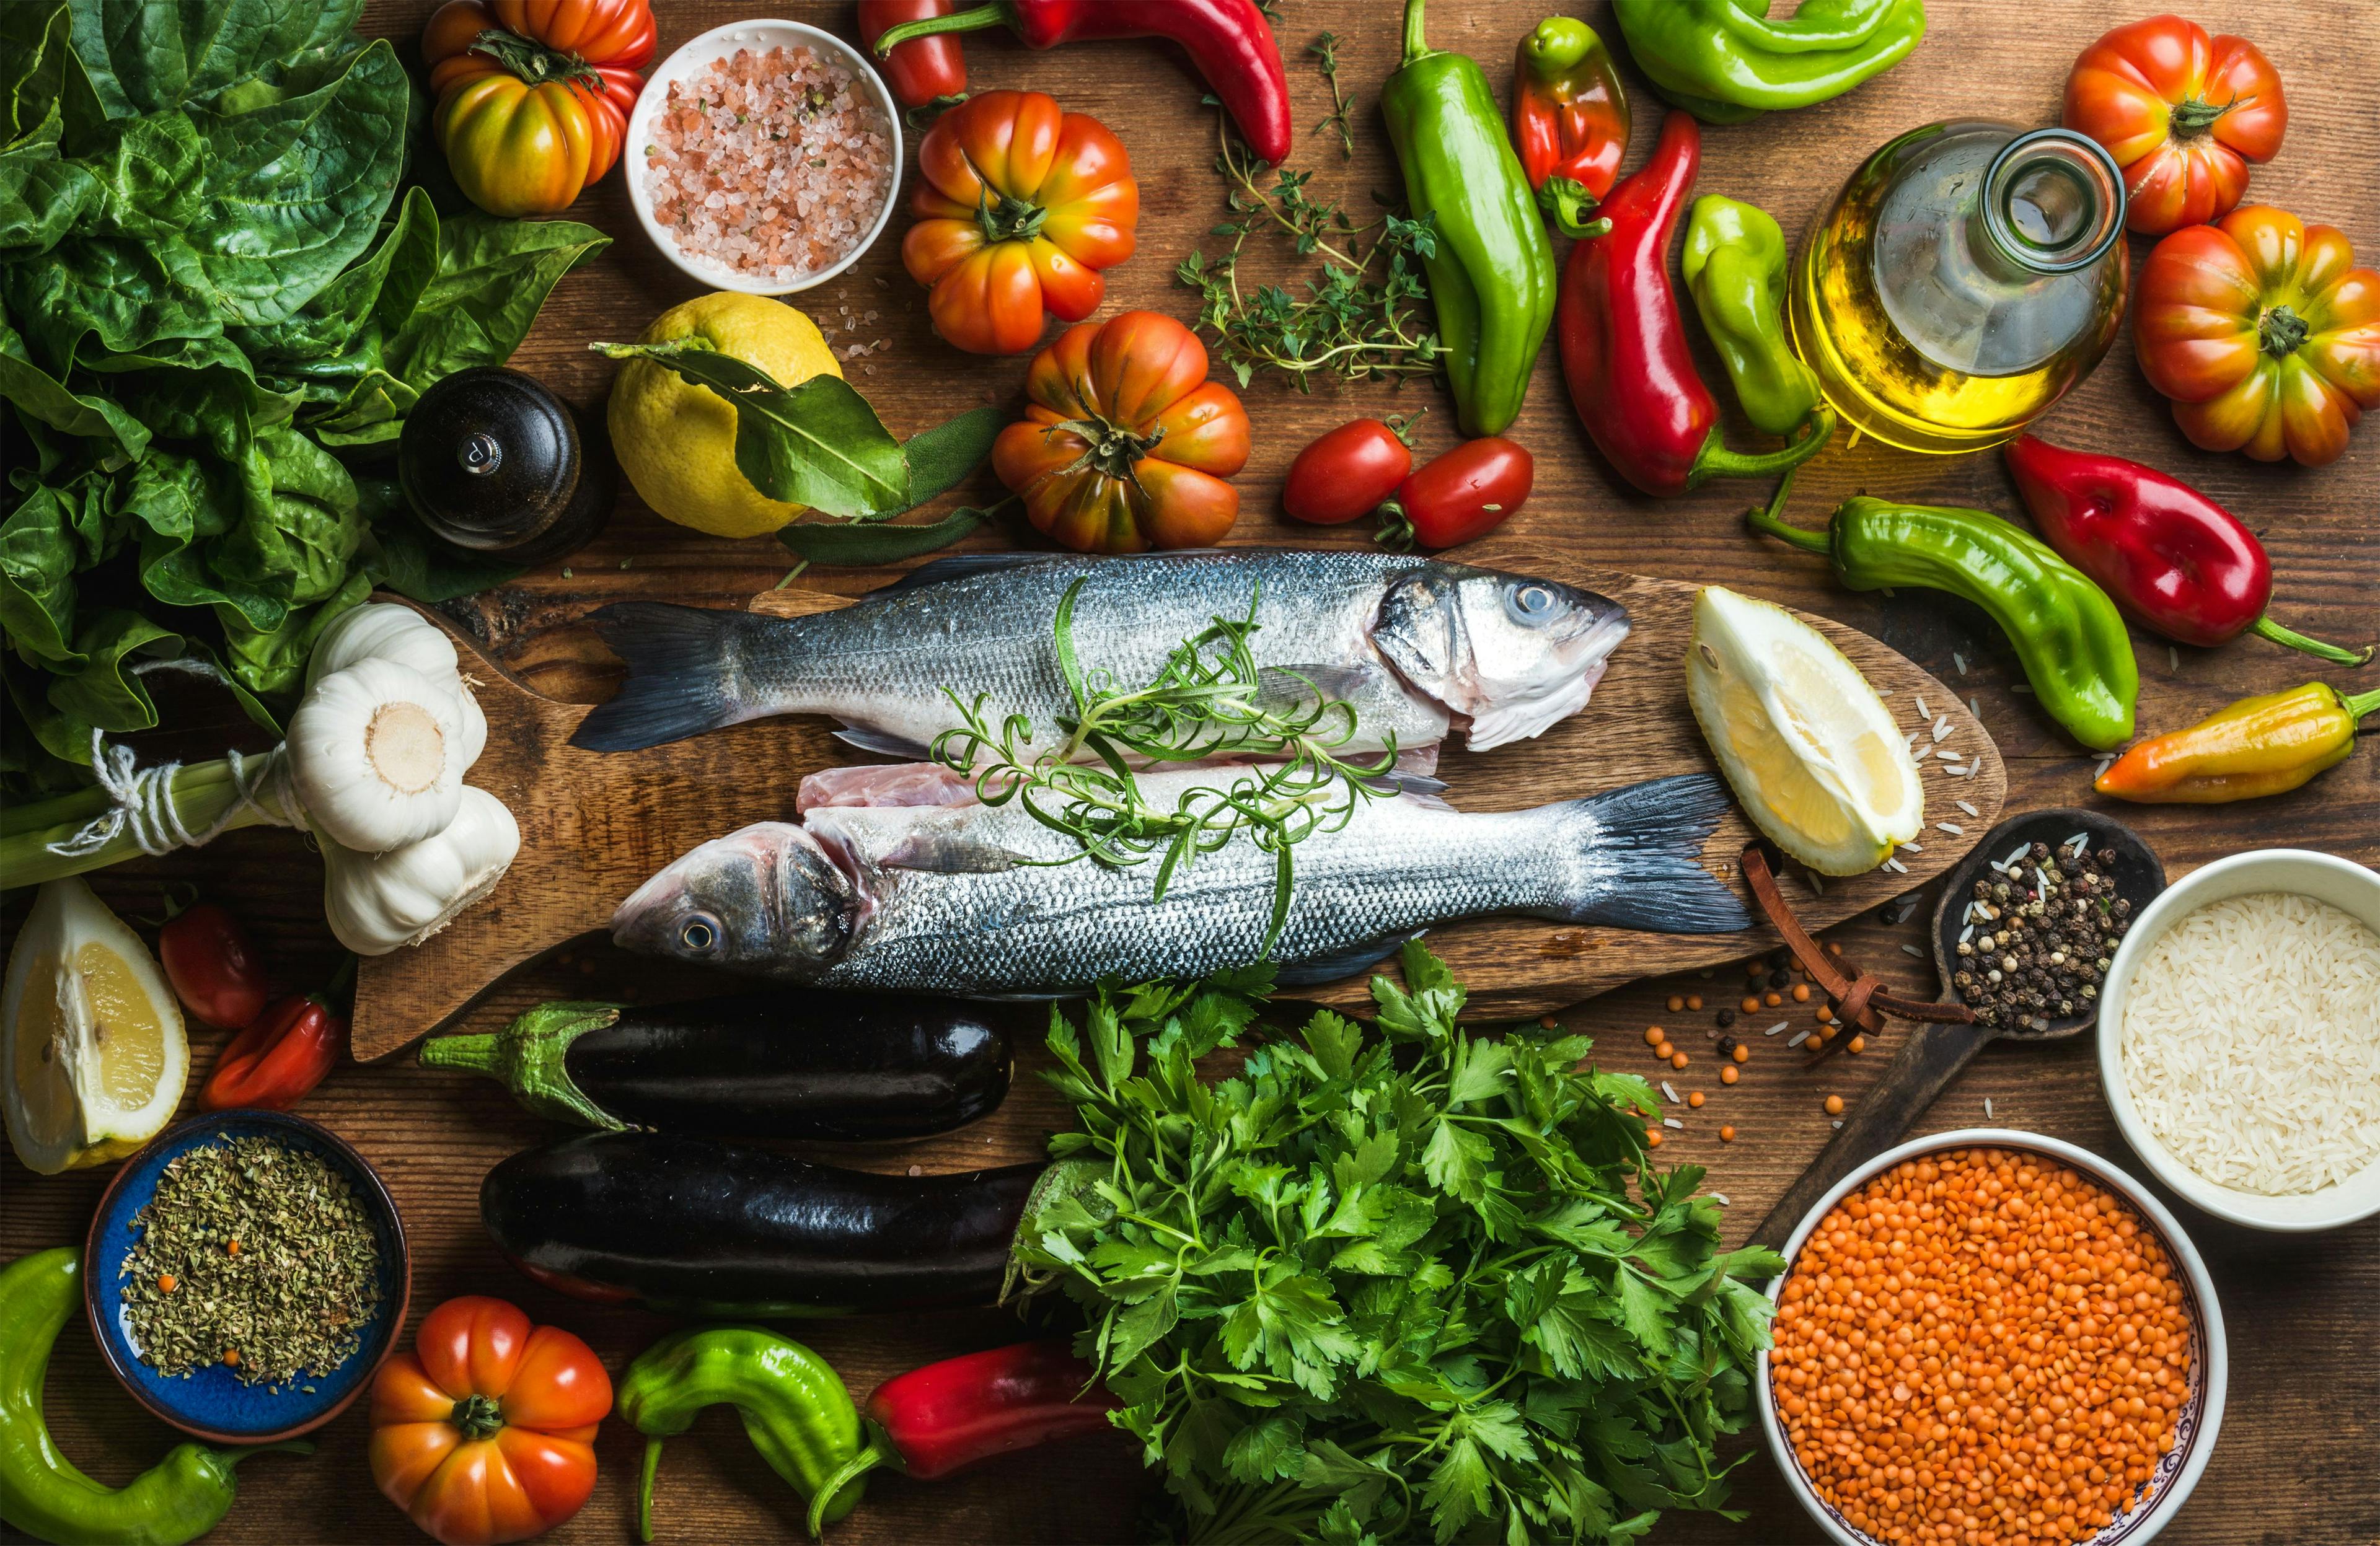 Mediterranean Diet Could Help Reduce Adverse Pregnancy Outcomes